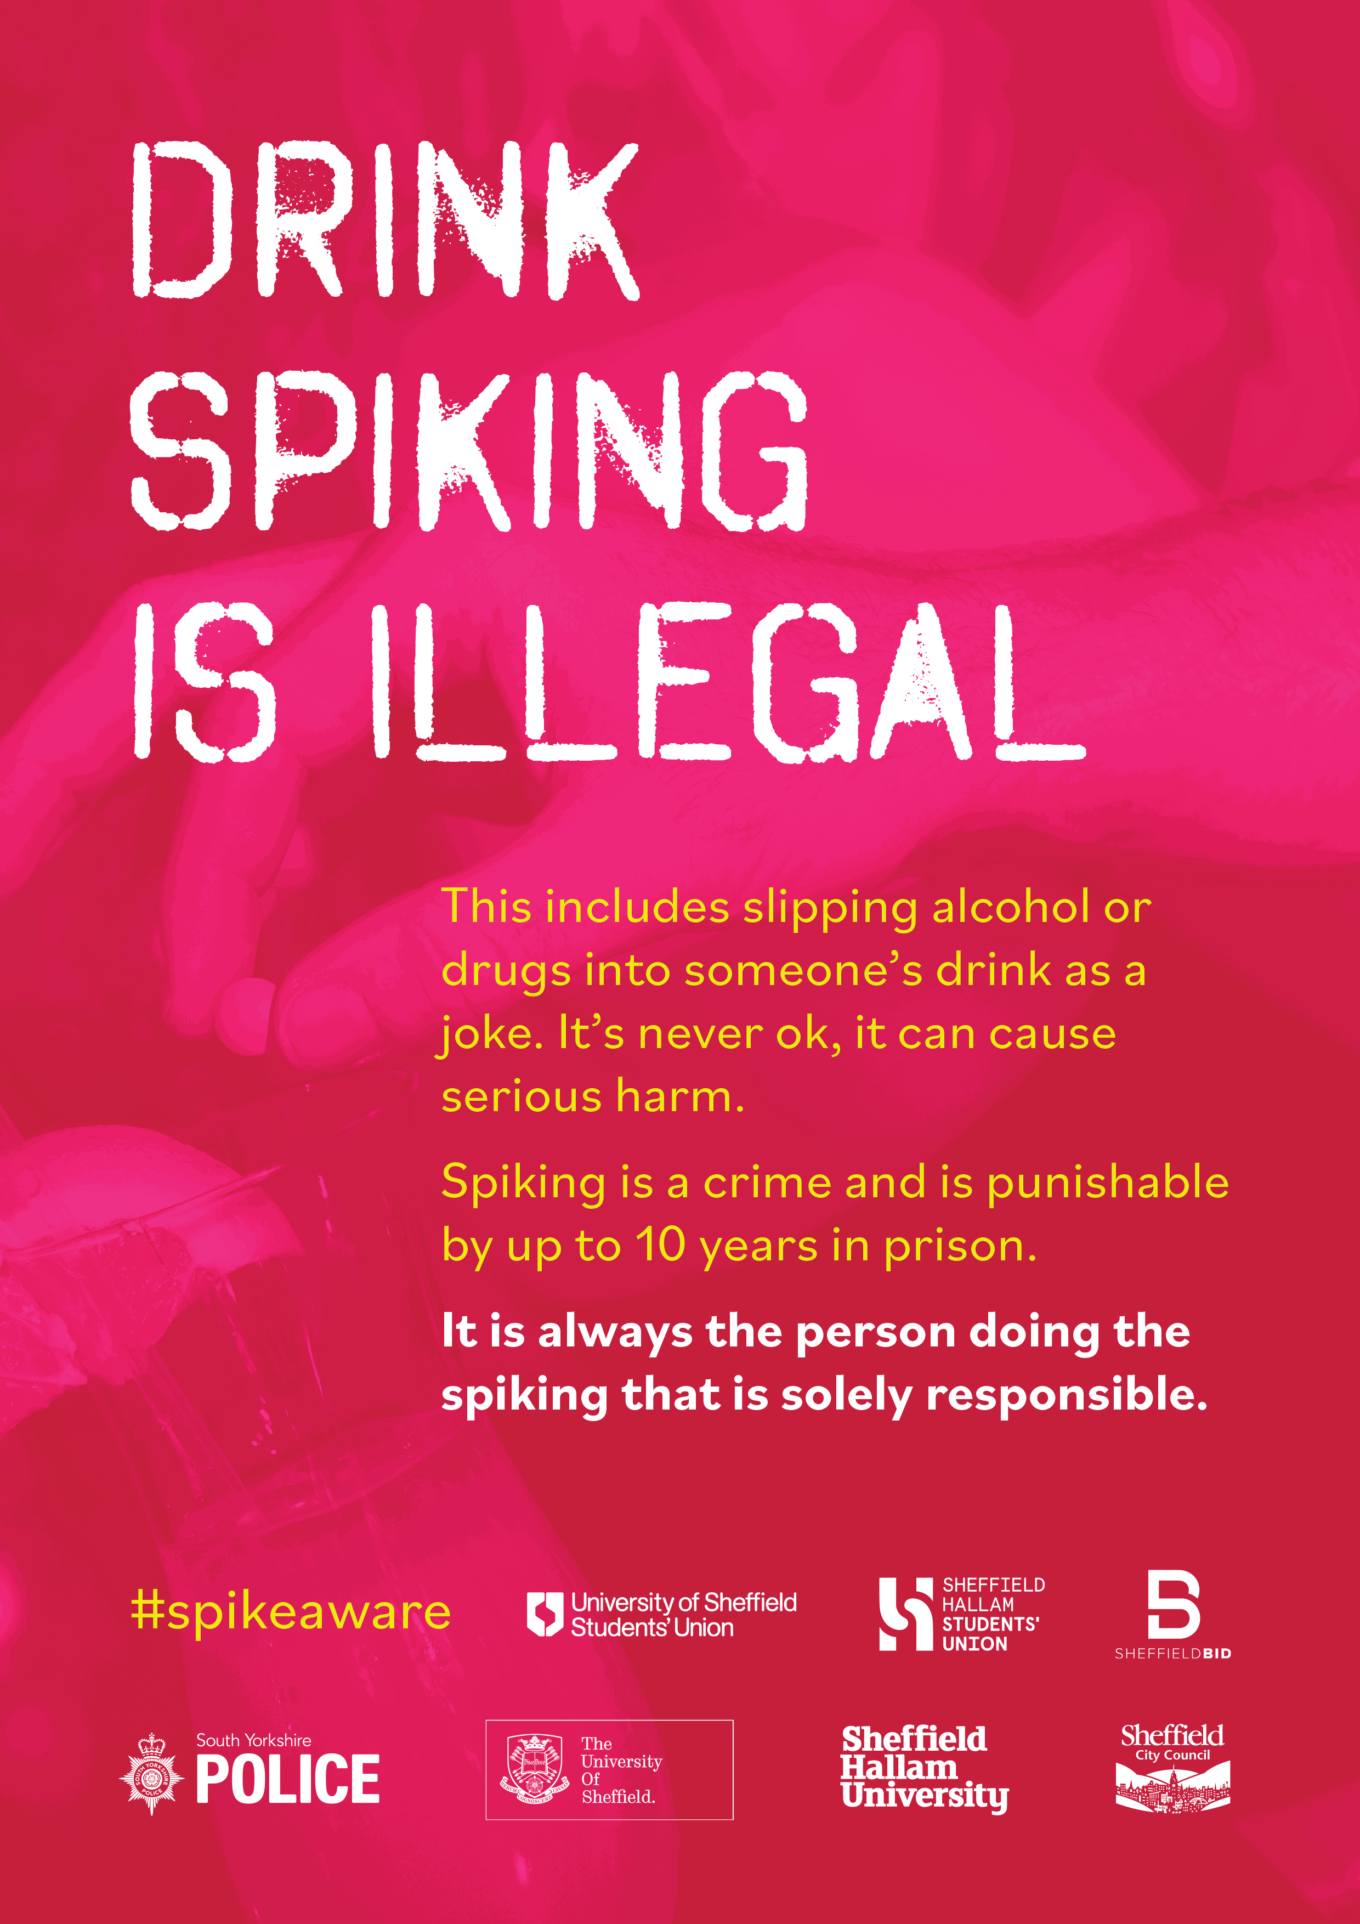 Drink Spiking Is Illegal poster aimed at perpetrators